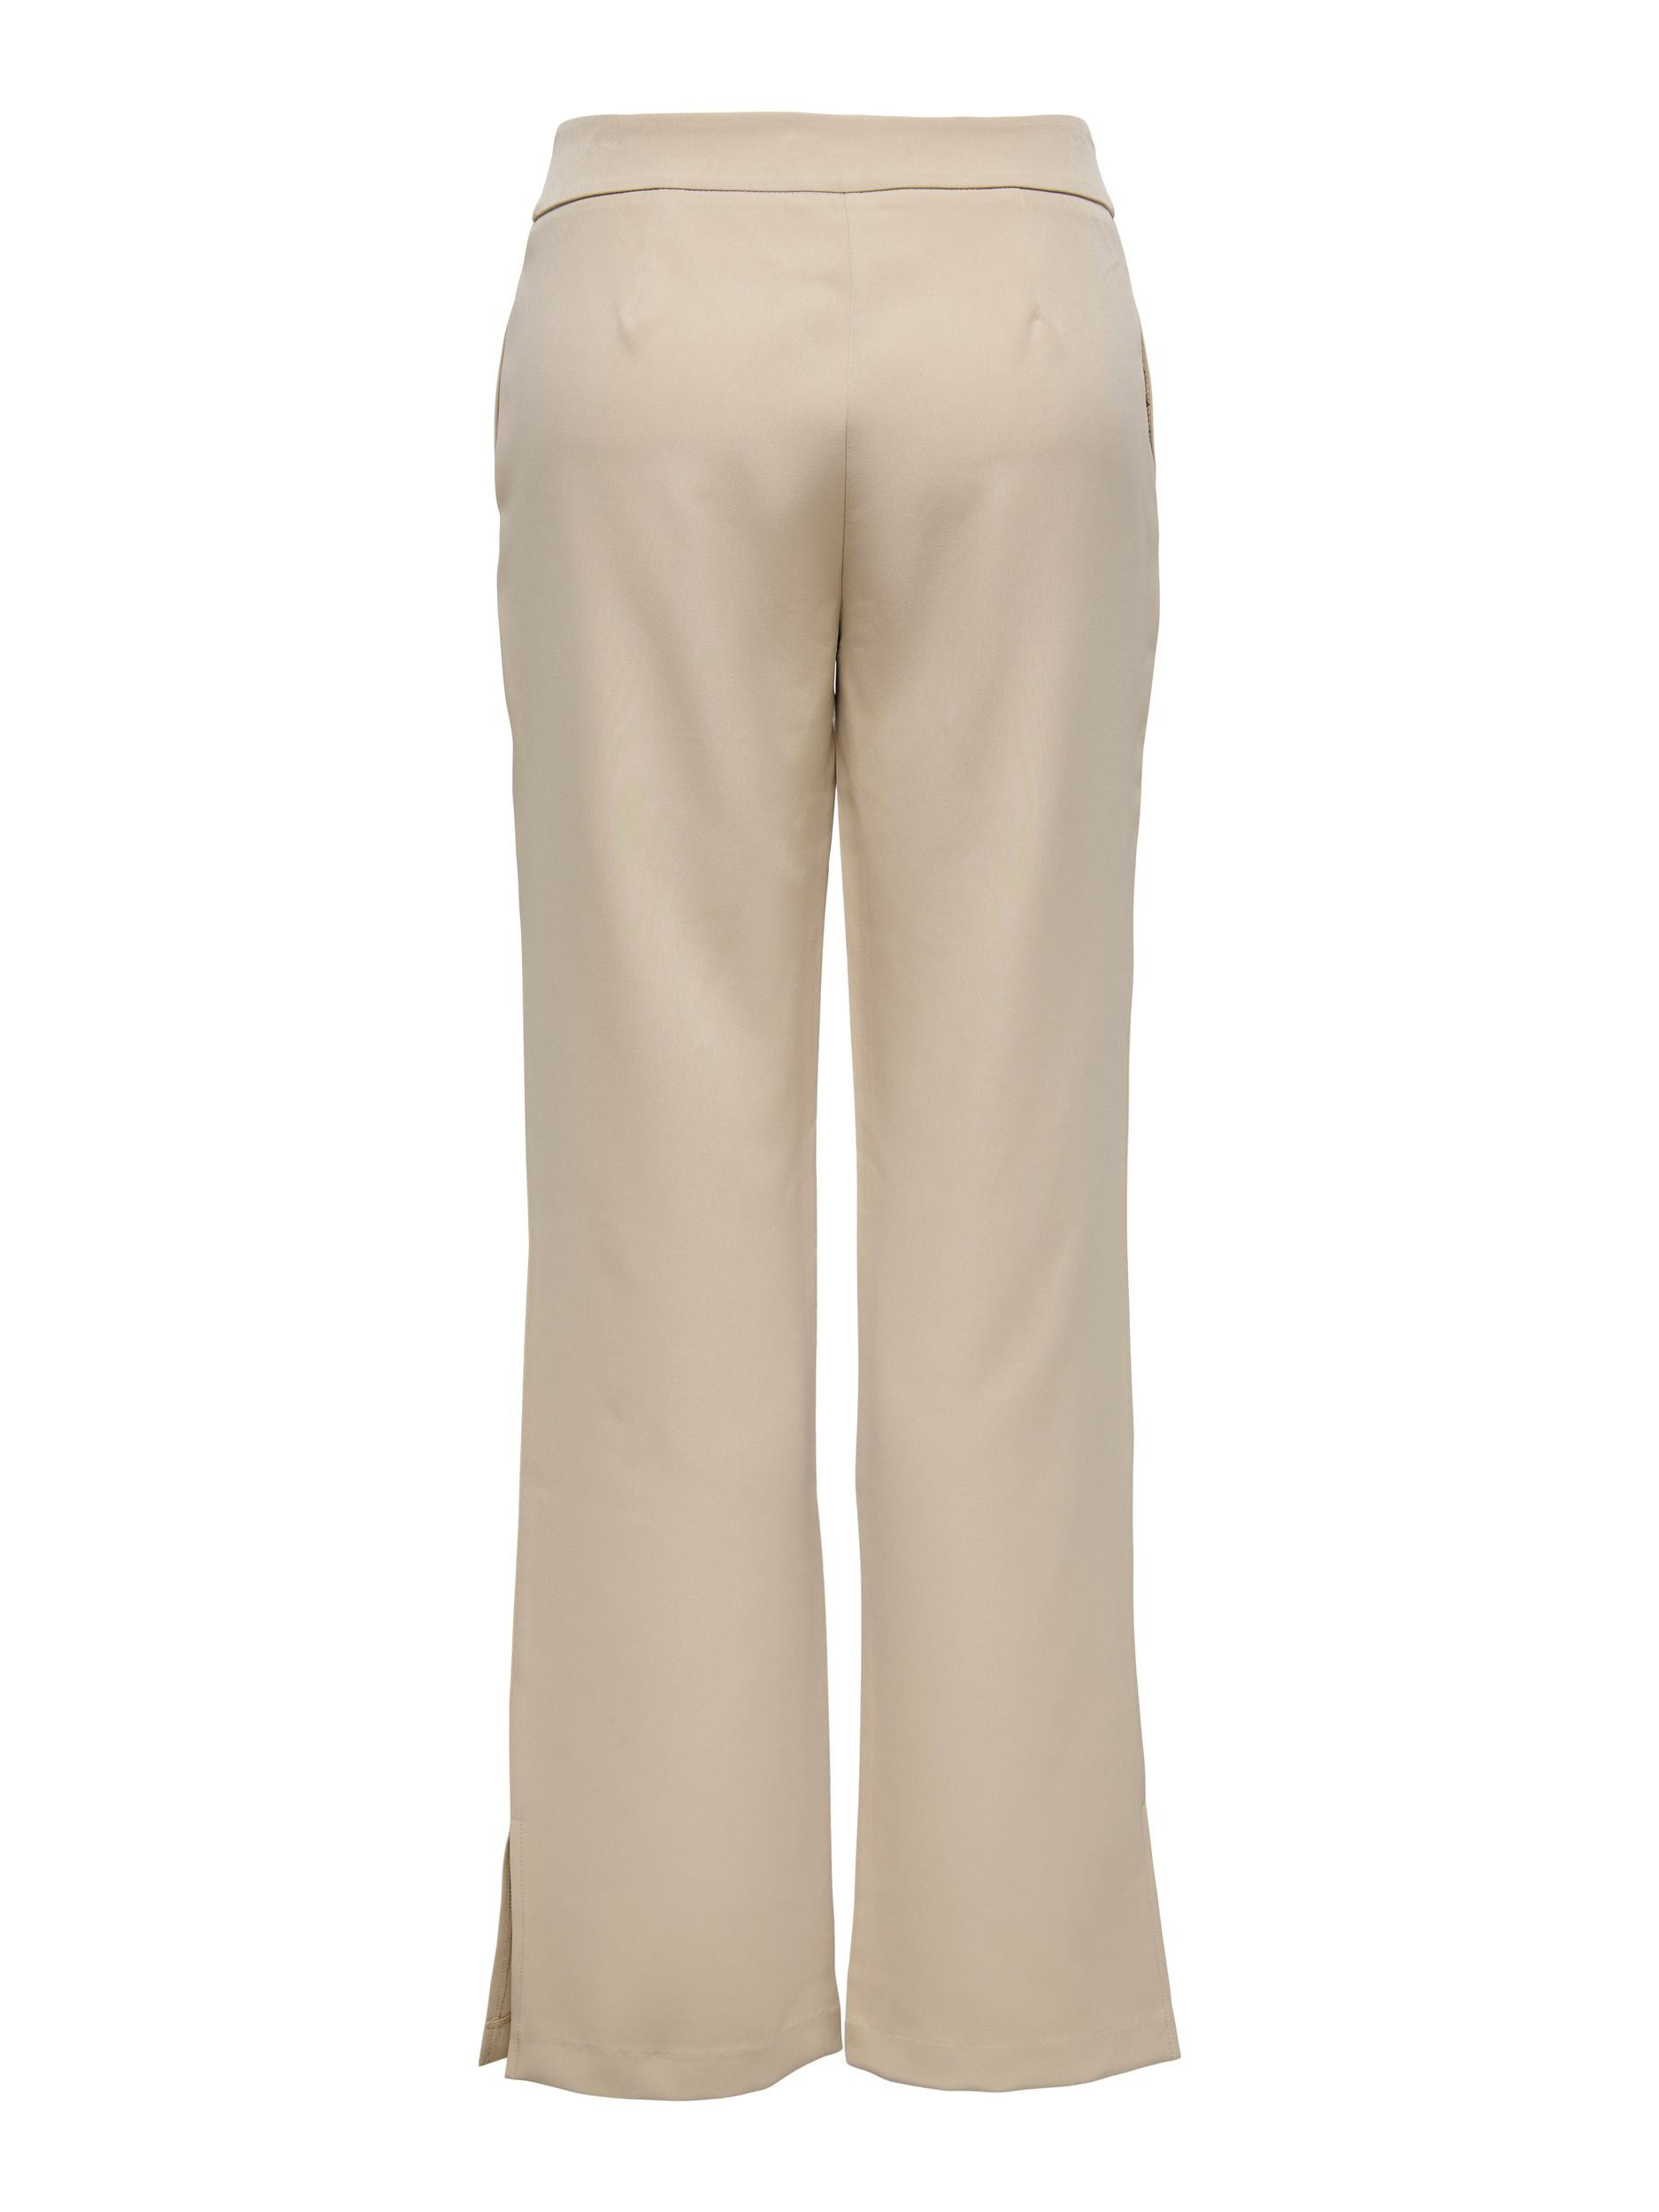 Only - Straight fit trousers, Light Beige, large image number 1